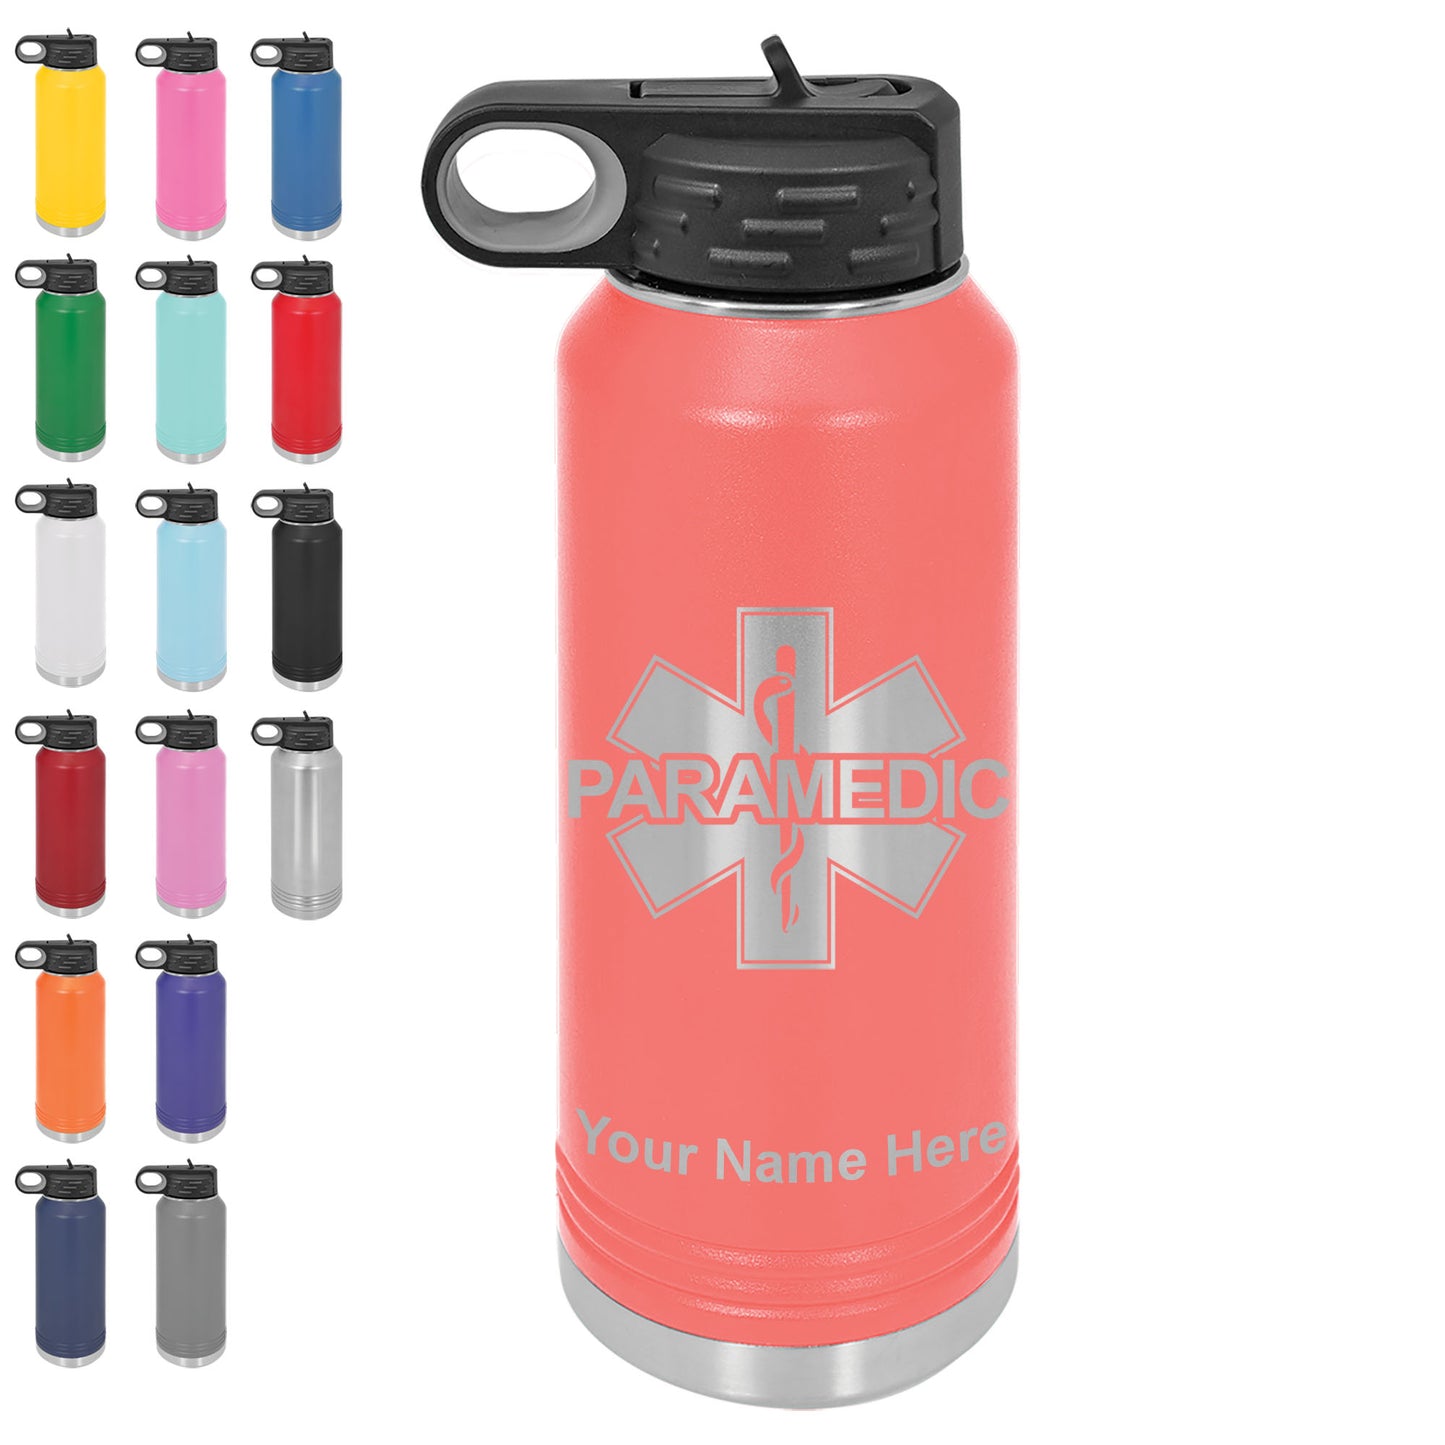 LaserGram 32oz Double Wall Flip Top Water Bottle with Straw, Paramedic, Personalized Engraving Included